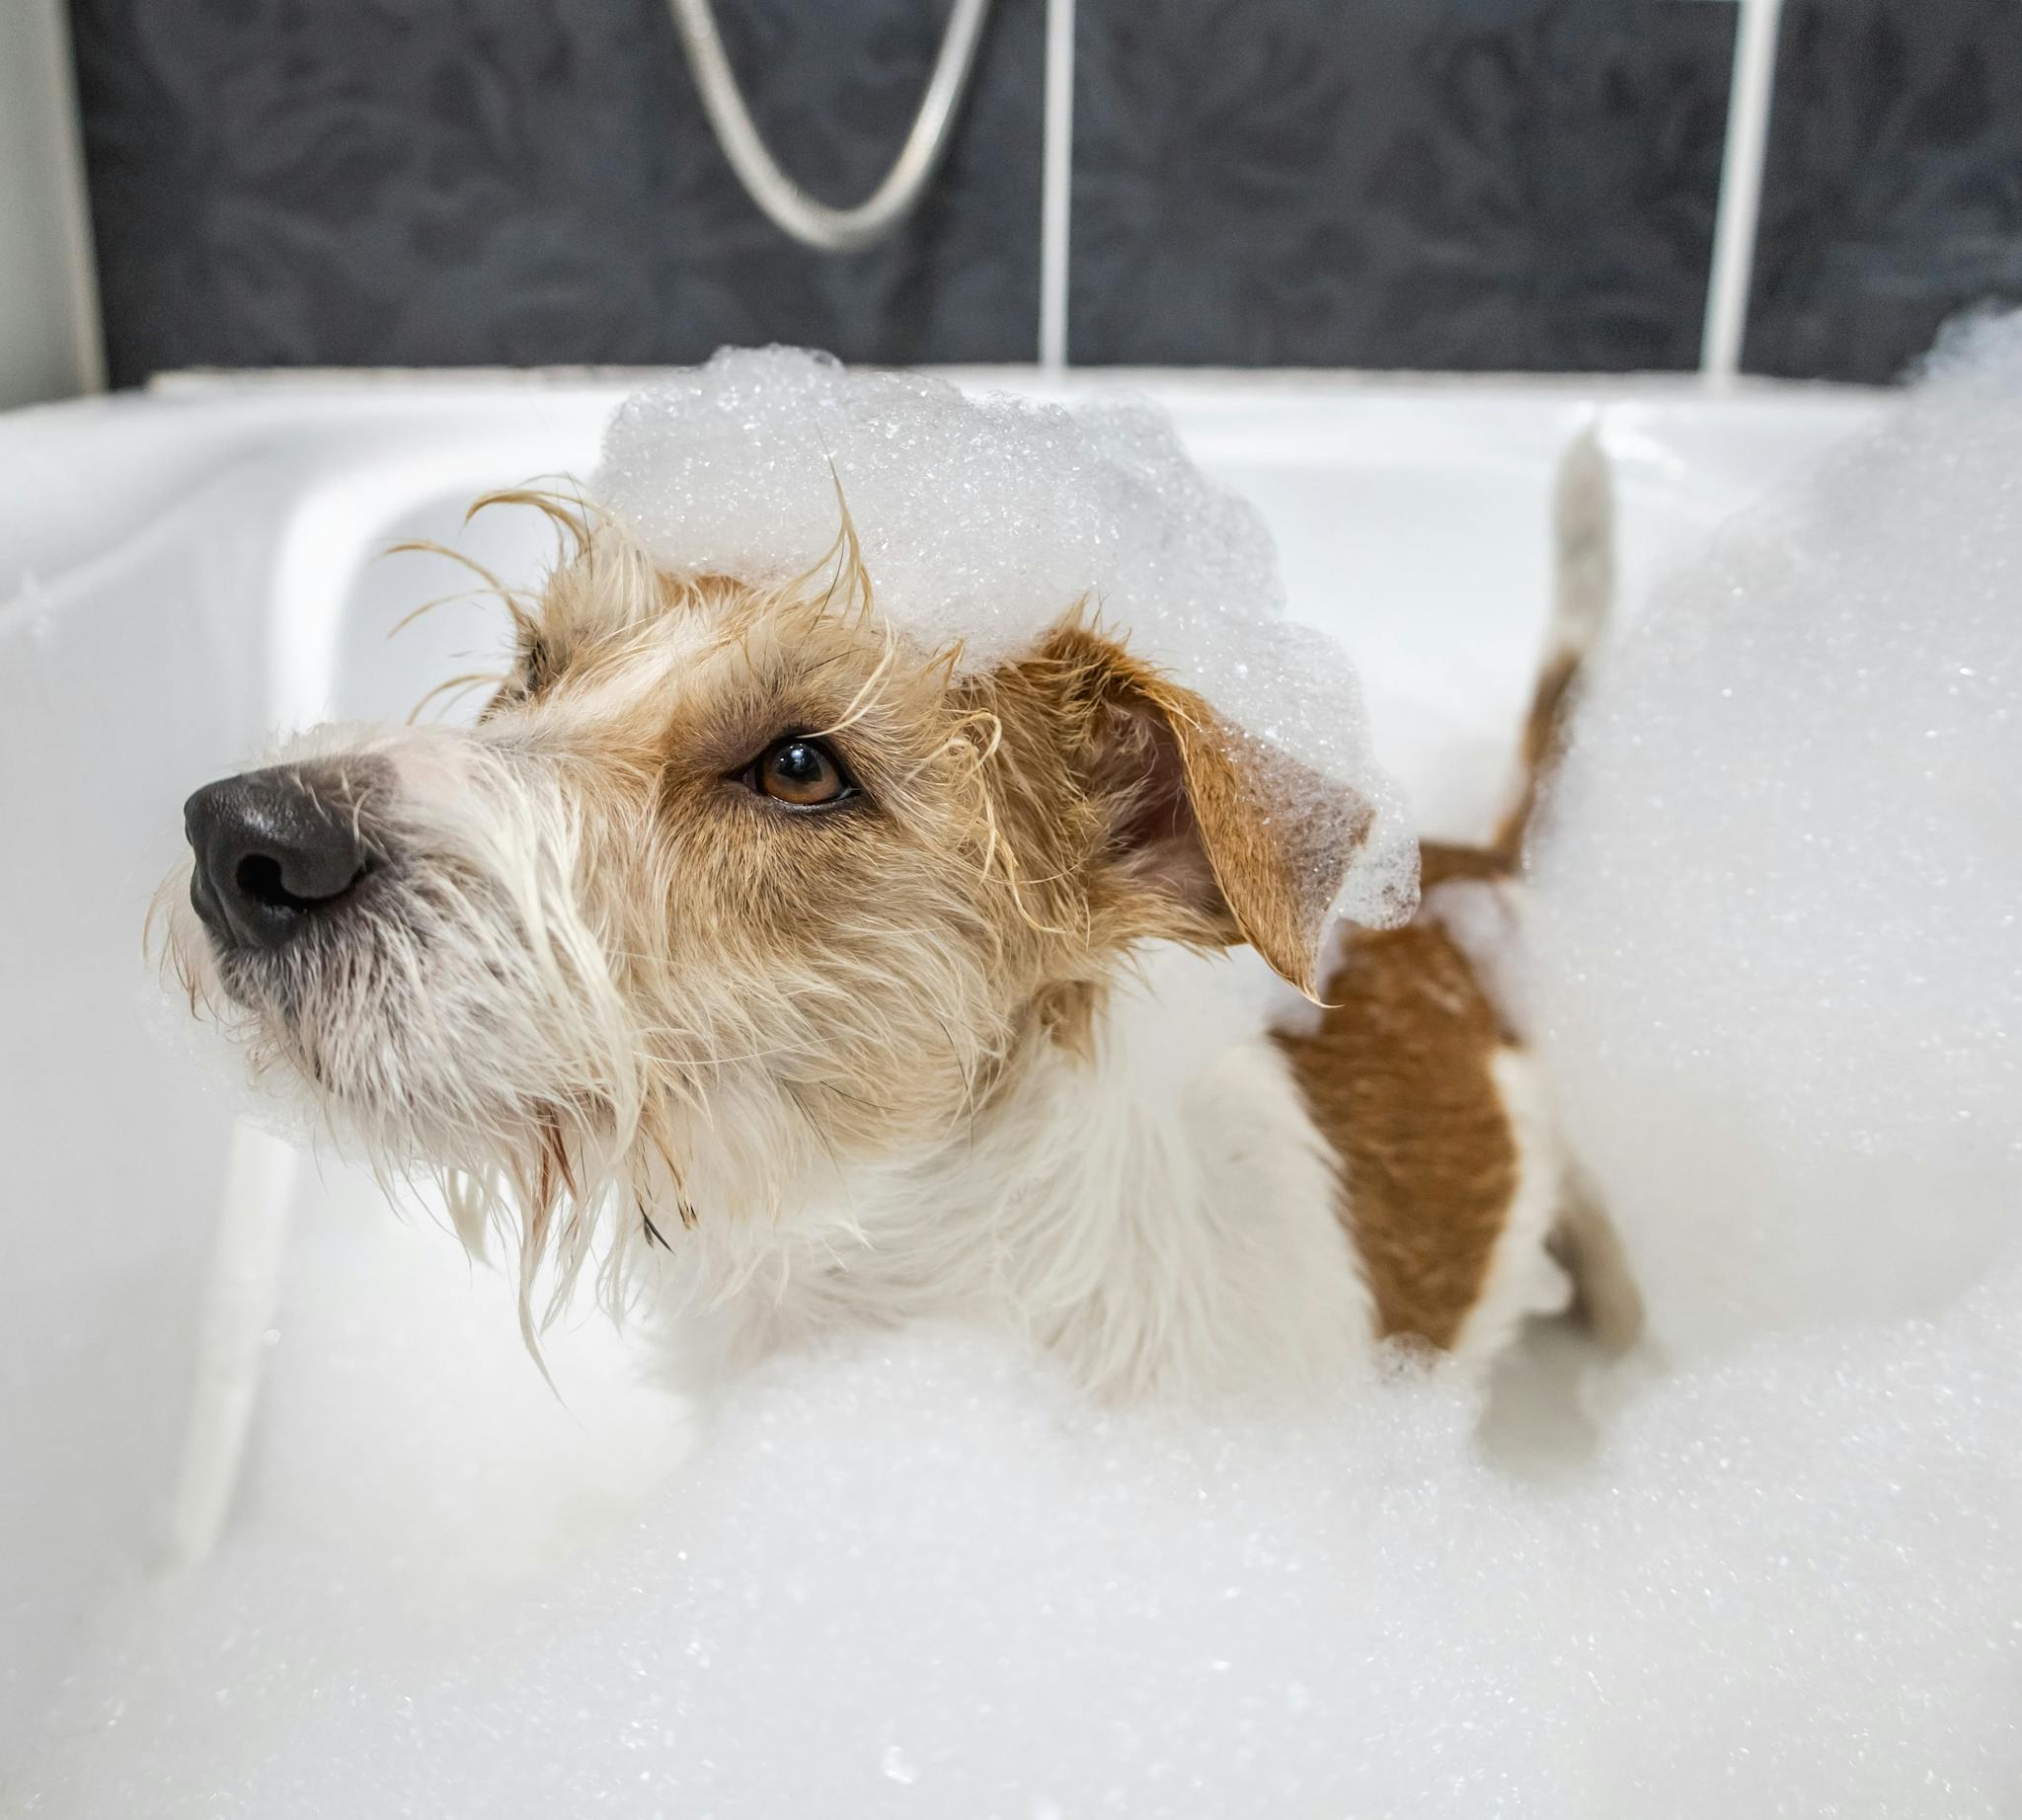 GroomingSalon_Interior: A clean and modern grooming salon, designed to provide a relaxing atmosphere for pets